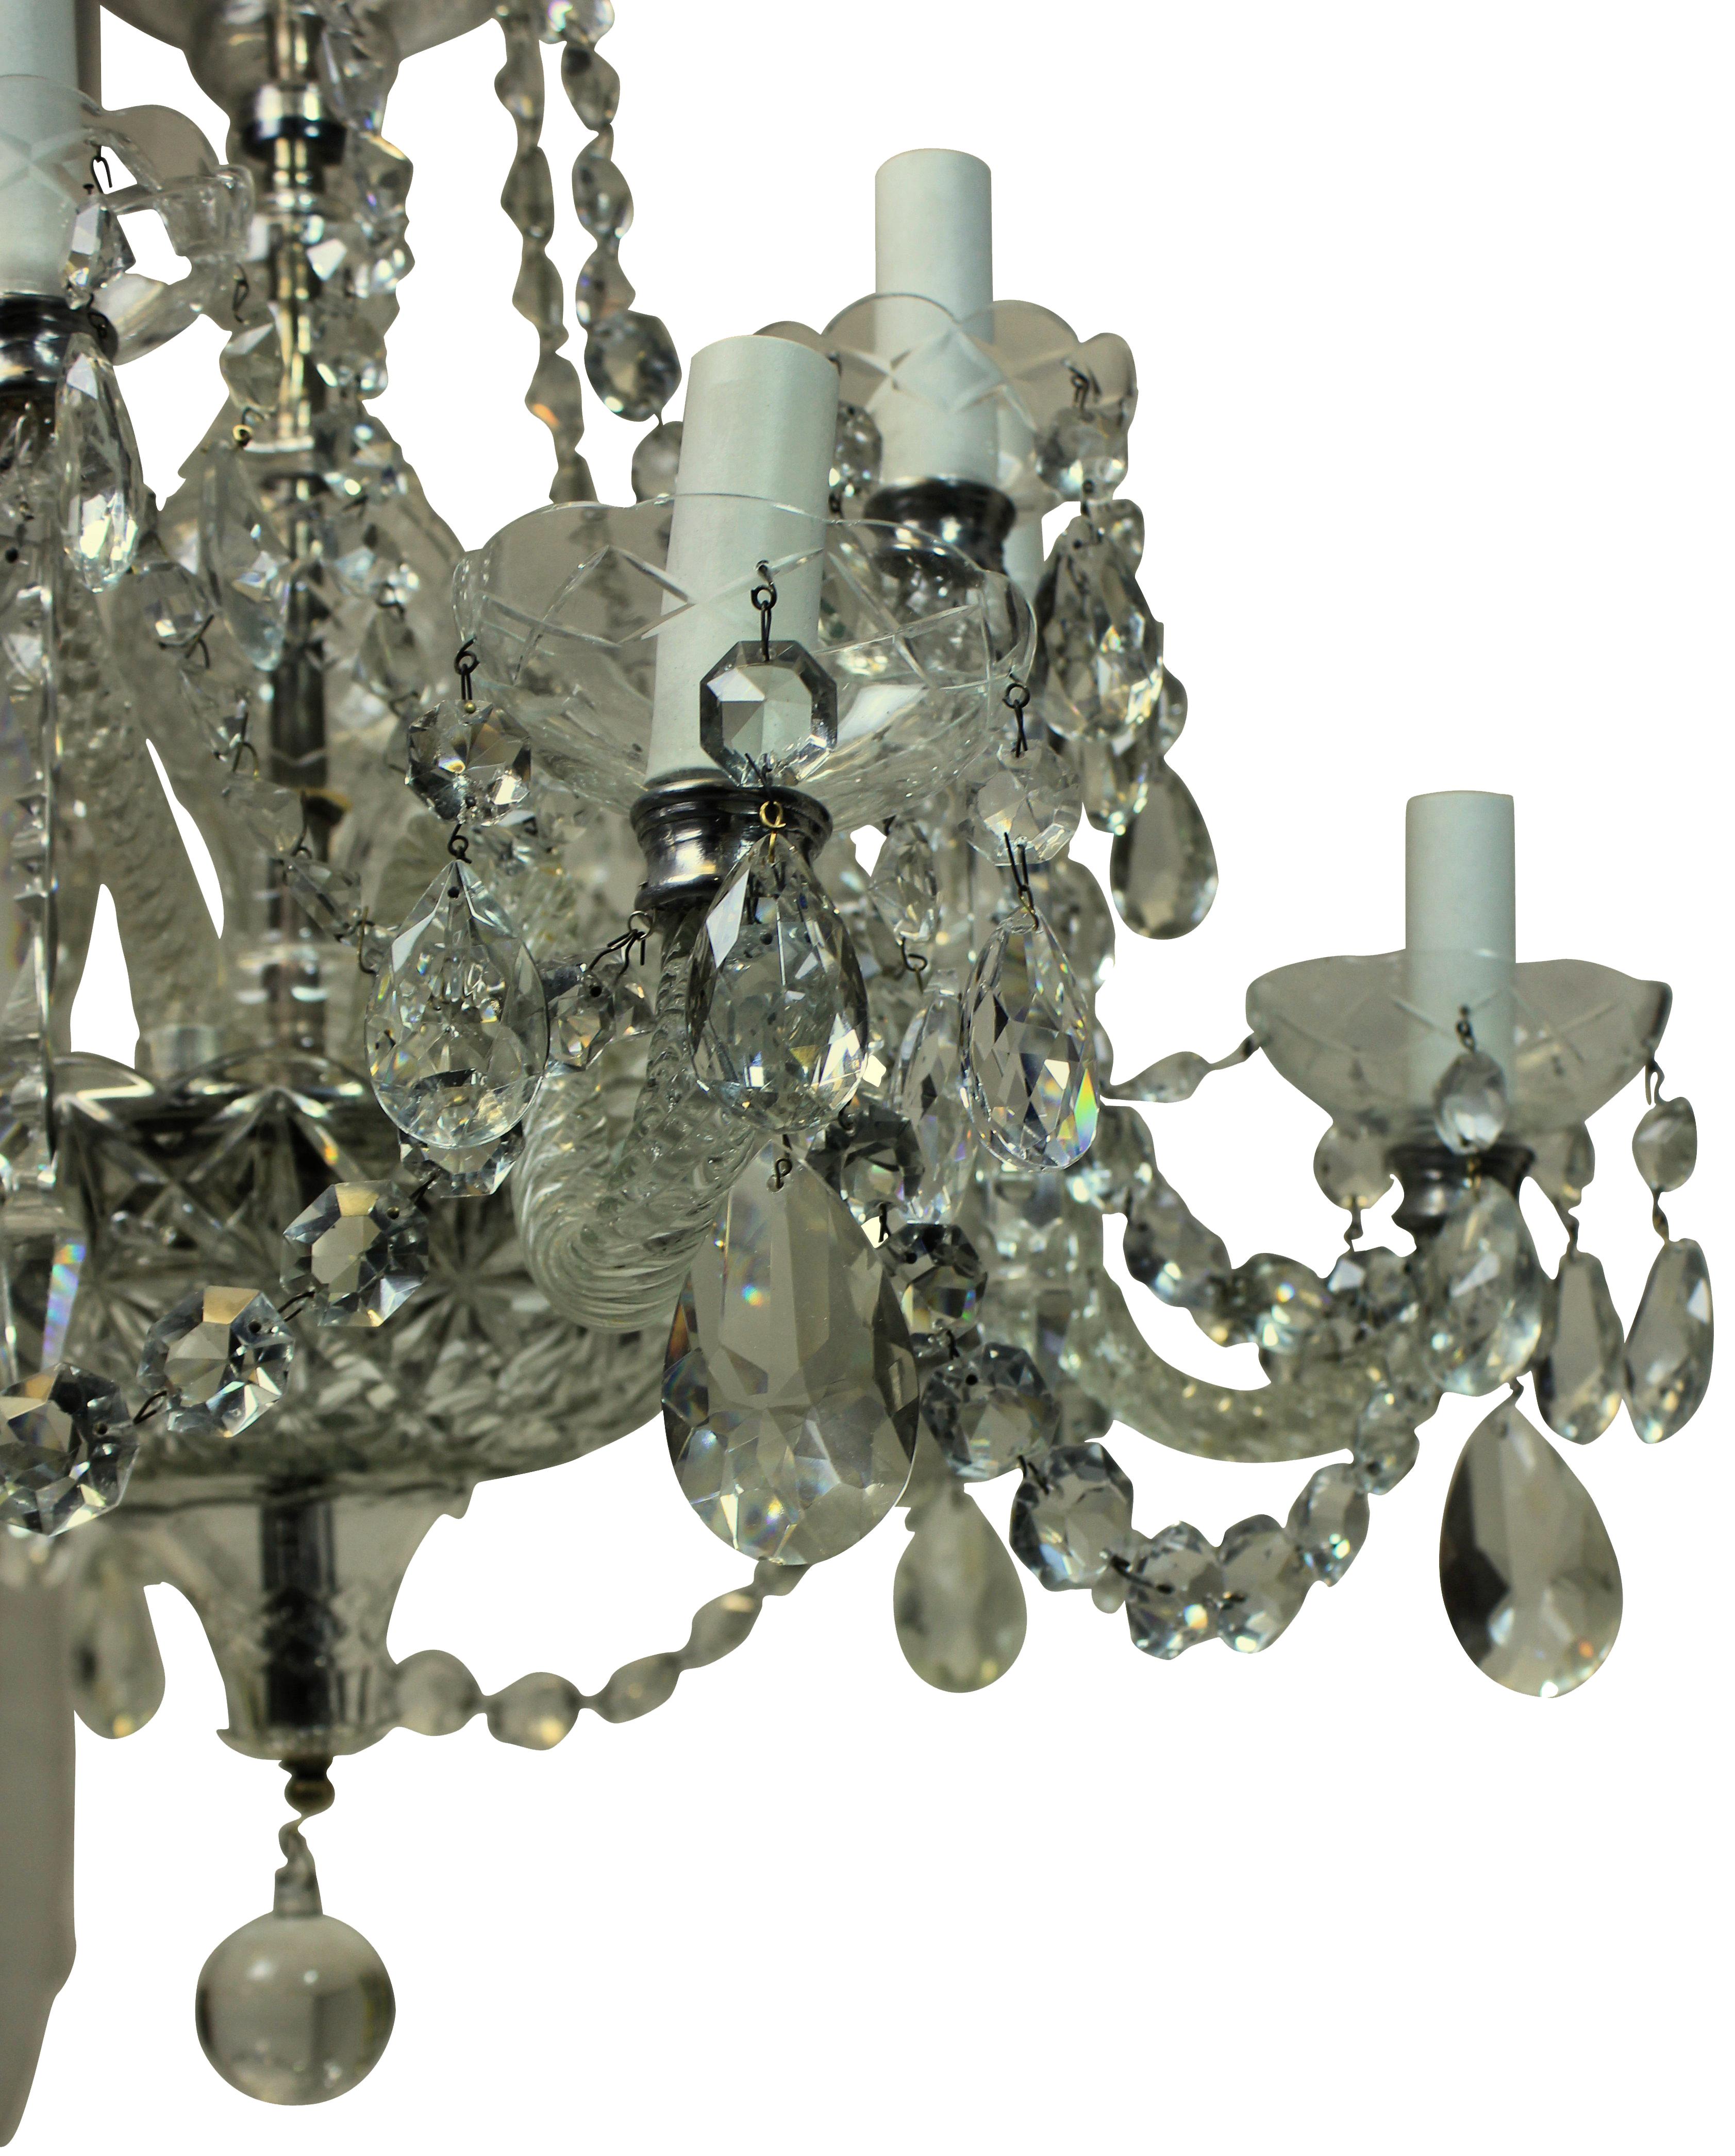 An English traditional cut-glass chandelier with up-swept and down-swept arms. Hung throughout with chains, swags and pendants.
 